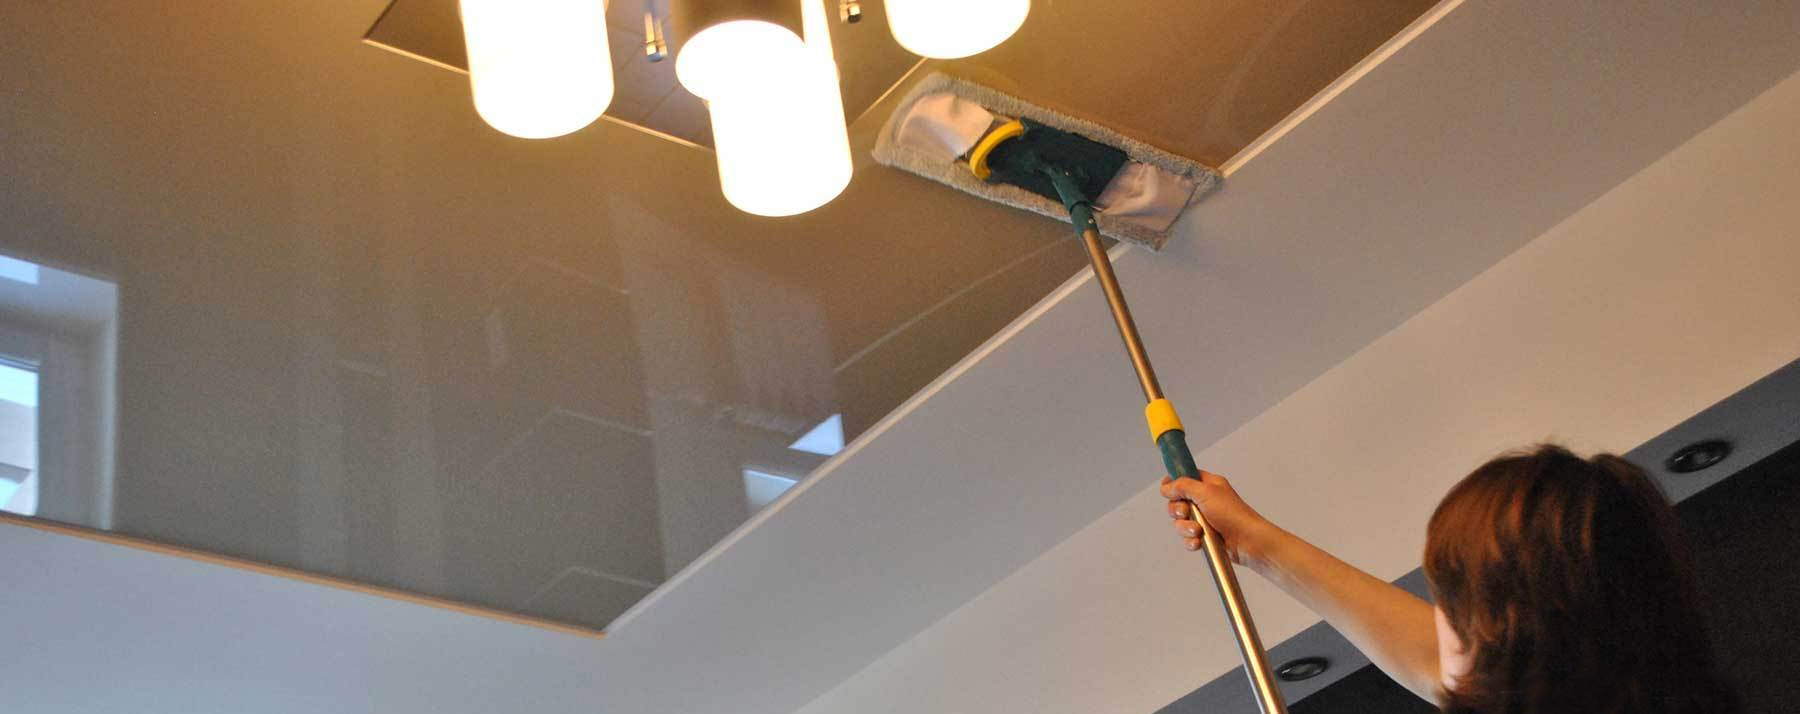 How To Wash The Glossy Stretch Ceiling At Home Without Staining